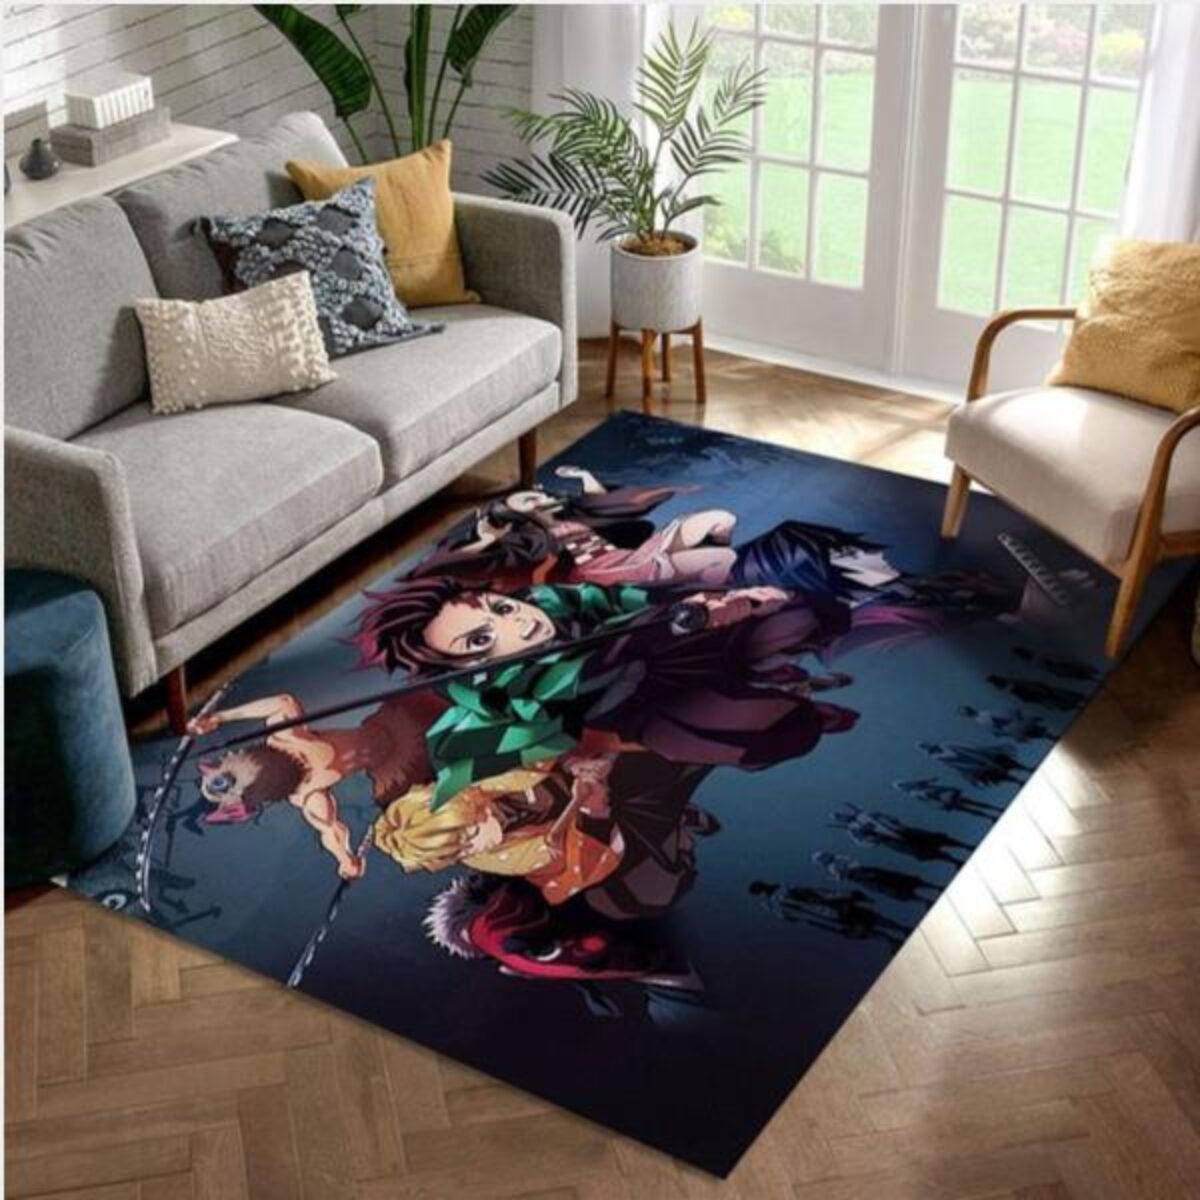 Classic Anime Rug - Square 2' x 3' - High Pile Polyester - Non Slip -  Handmade by AKYLDI at Dressmycrib